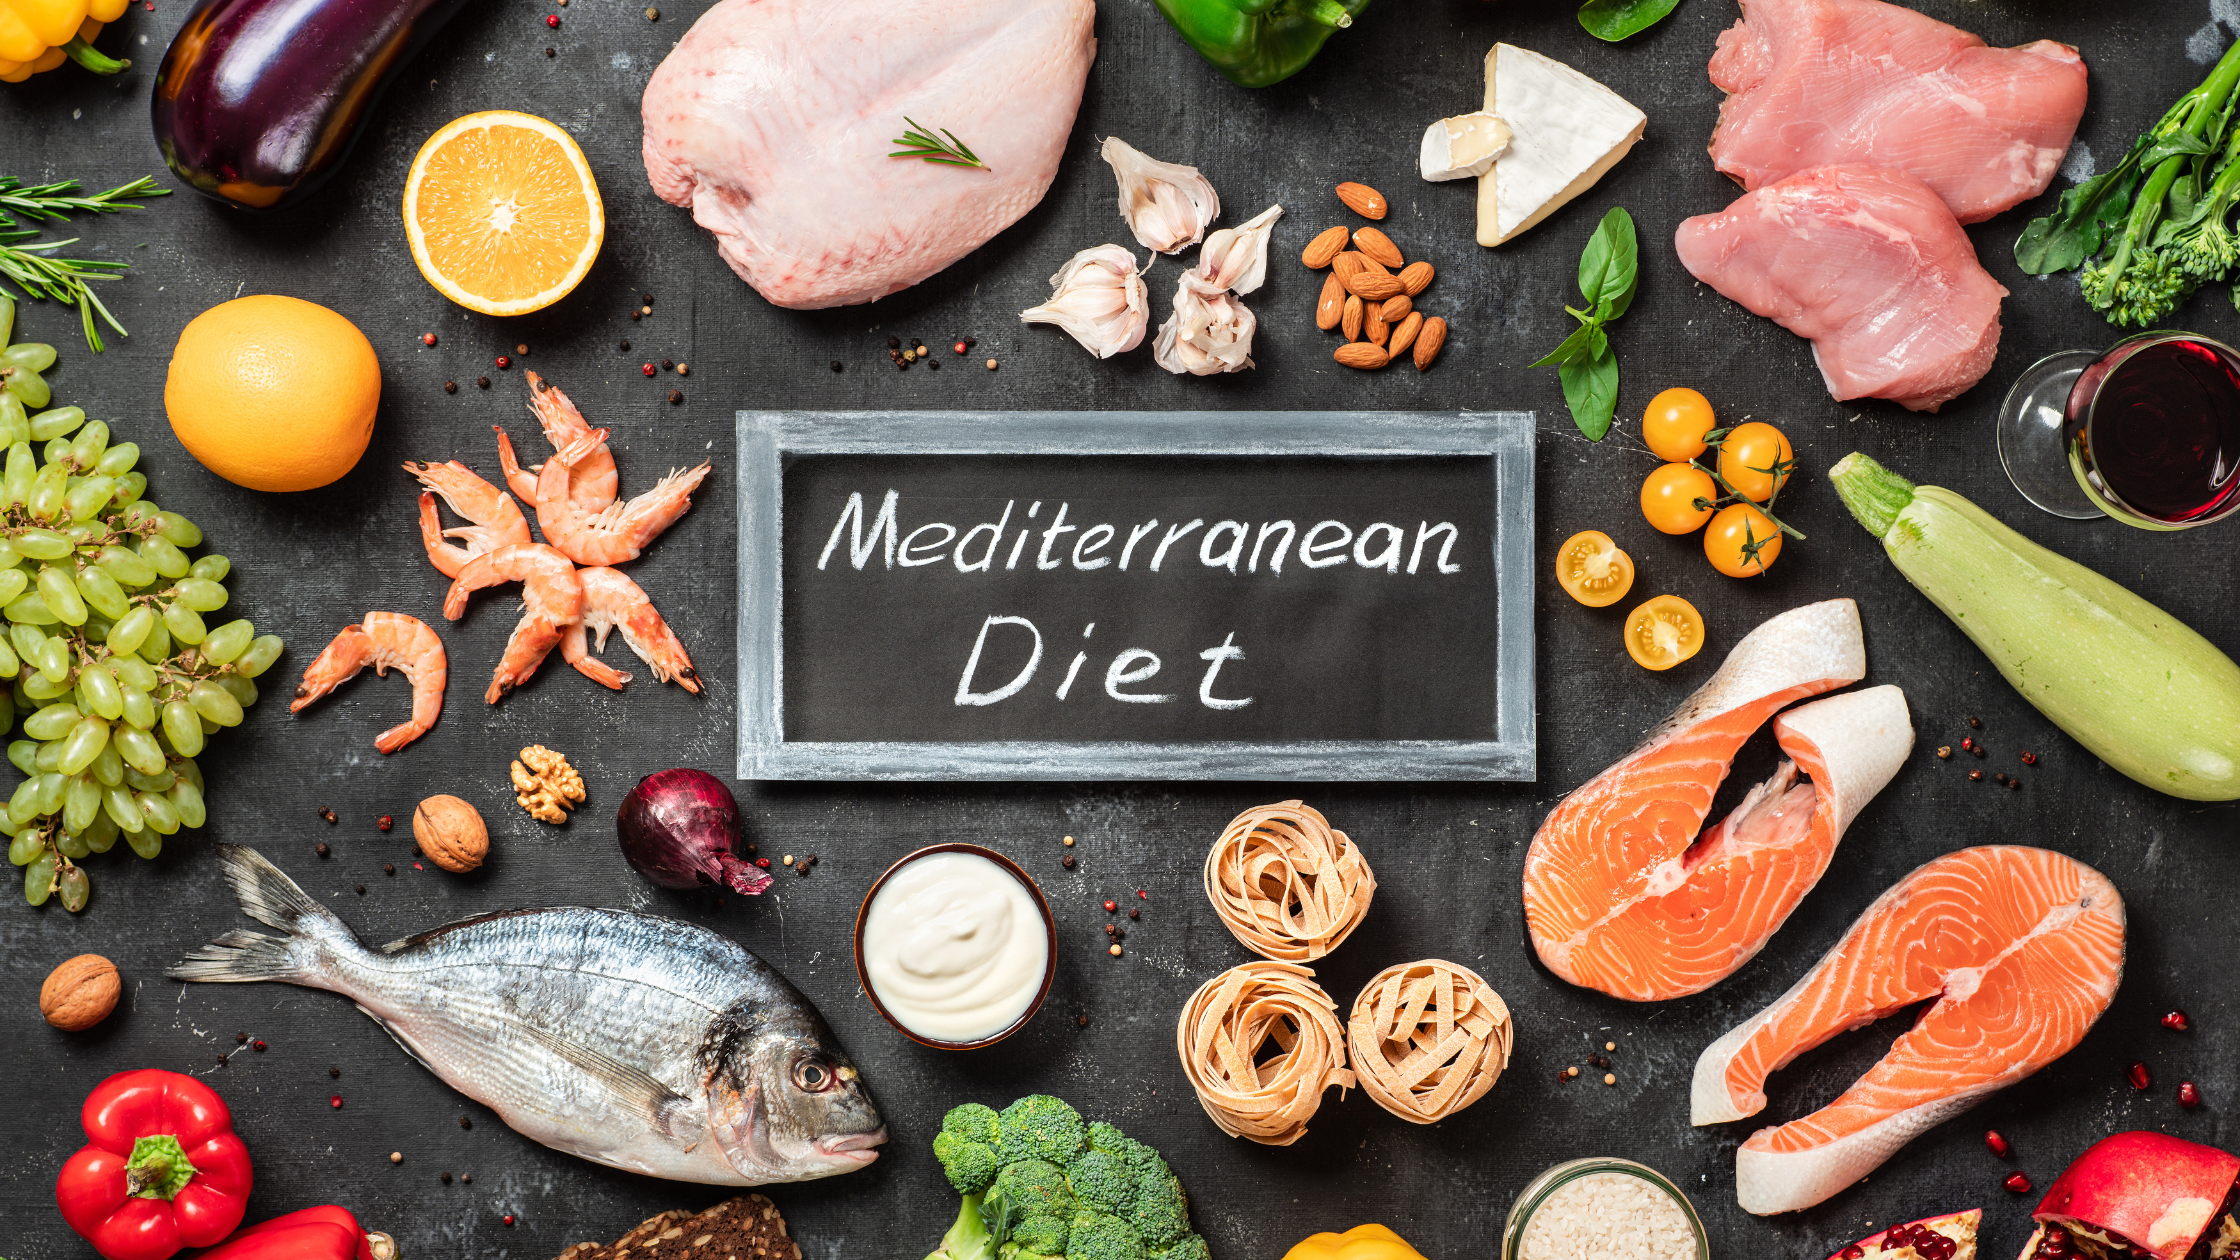 chalkboard reading "Mediterranean diet" surrounded by meats, veggies, and fruit